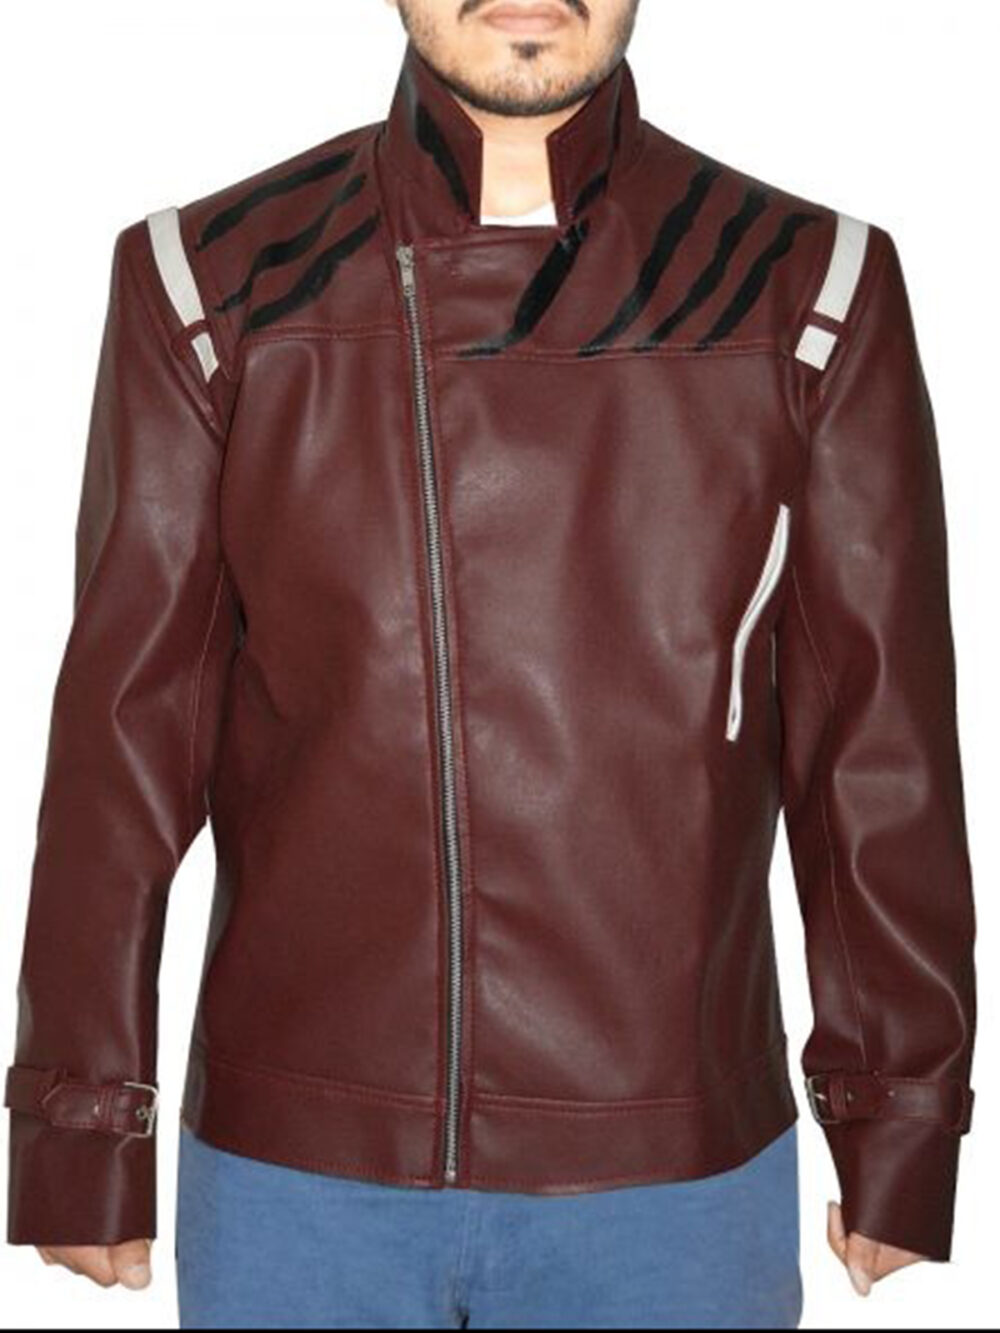 Travis Touchdown No More Heroes Jacket